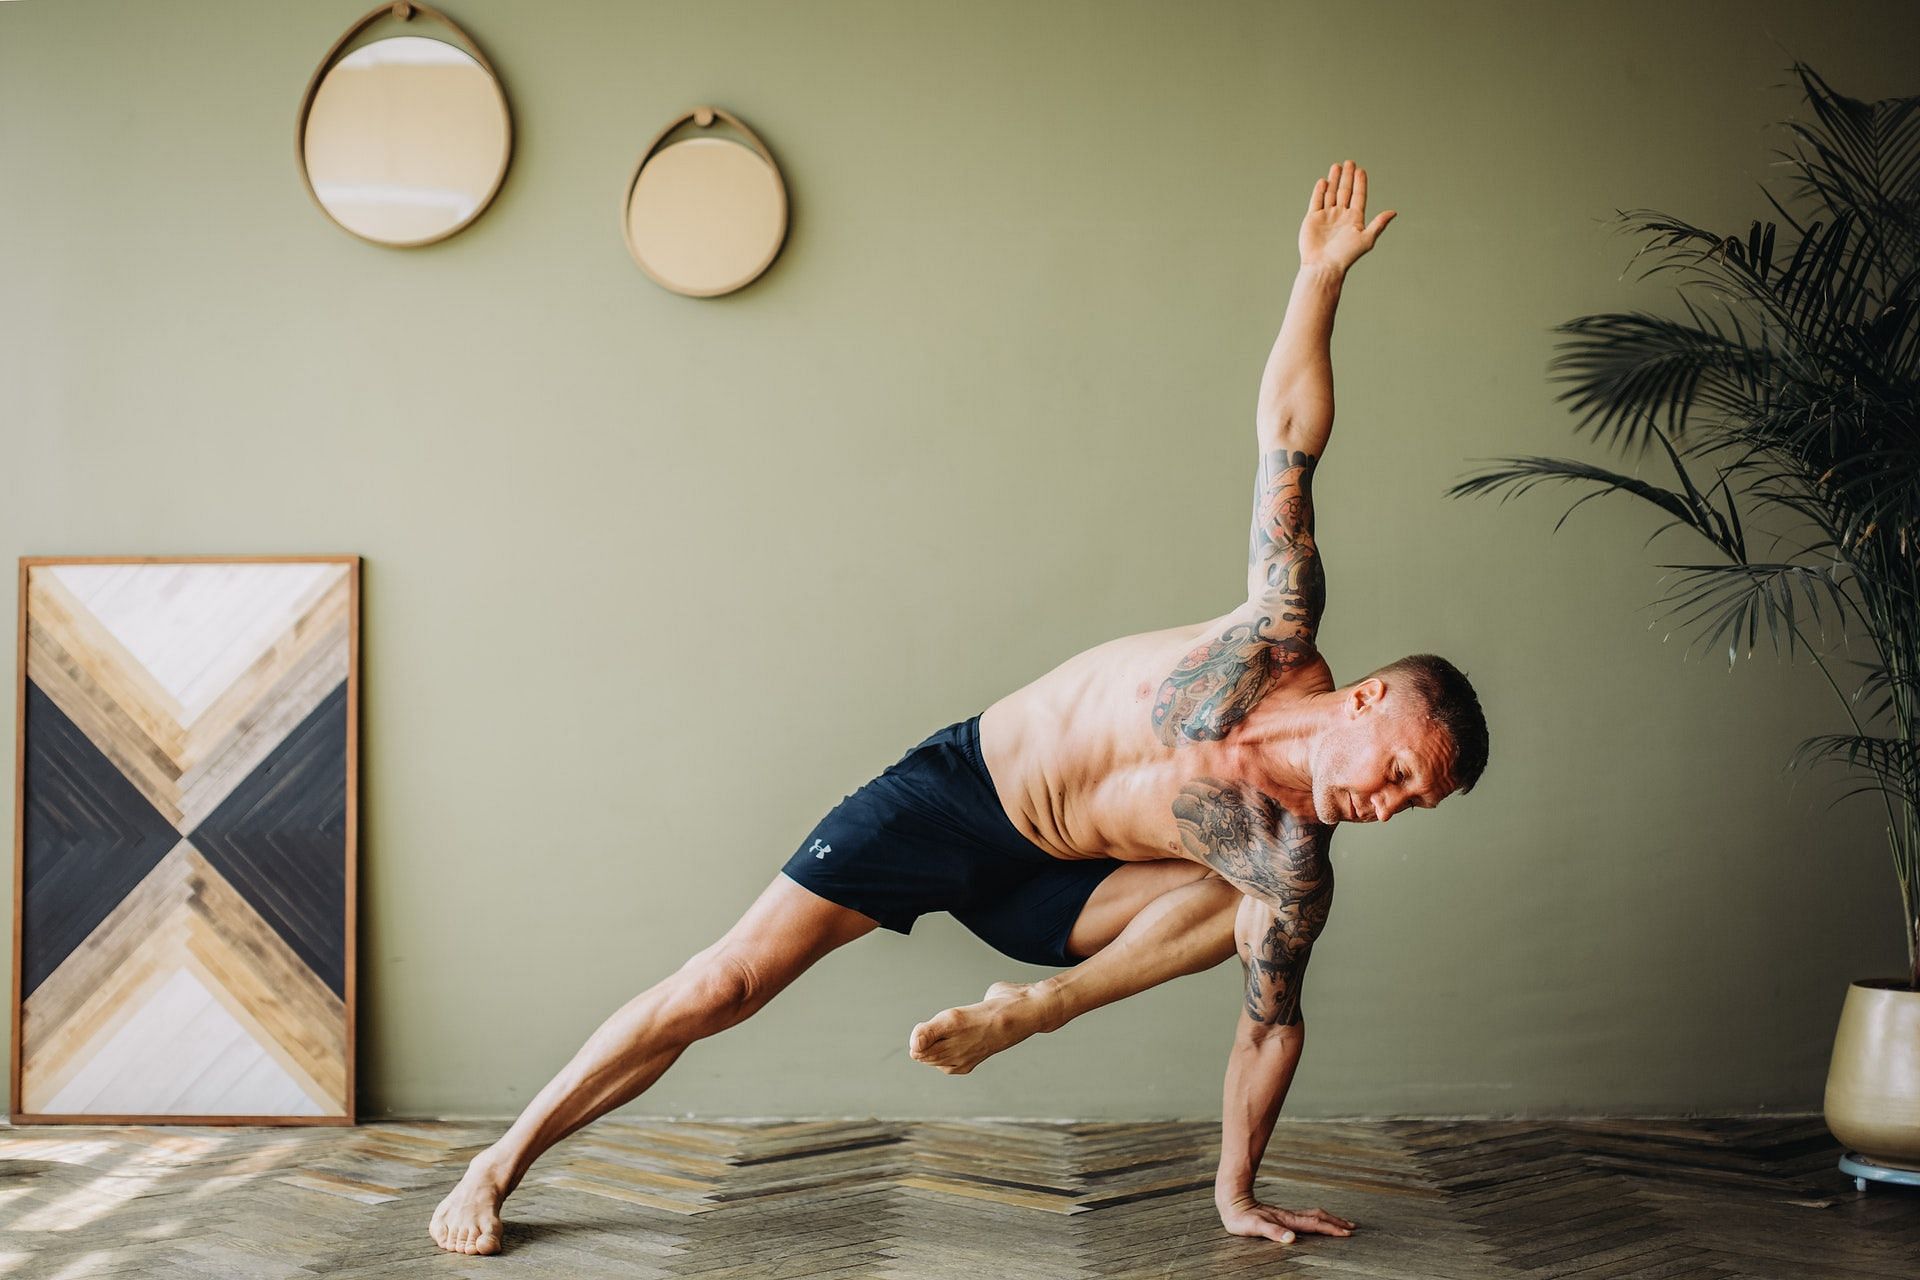 Yoga for Athletes: 5 Reasons Yoga Should Be Included in Athletic